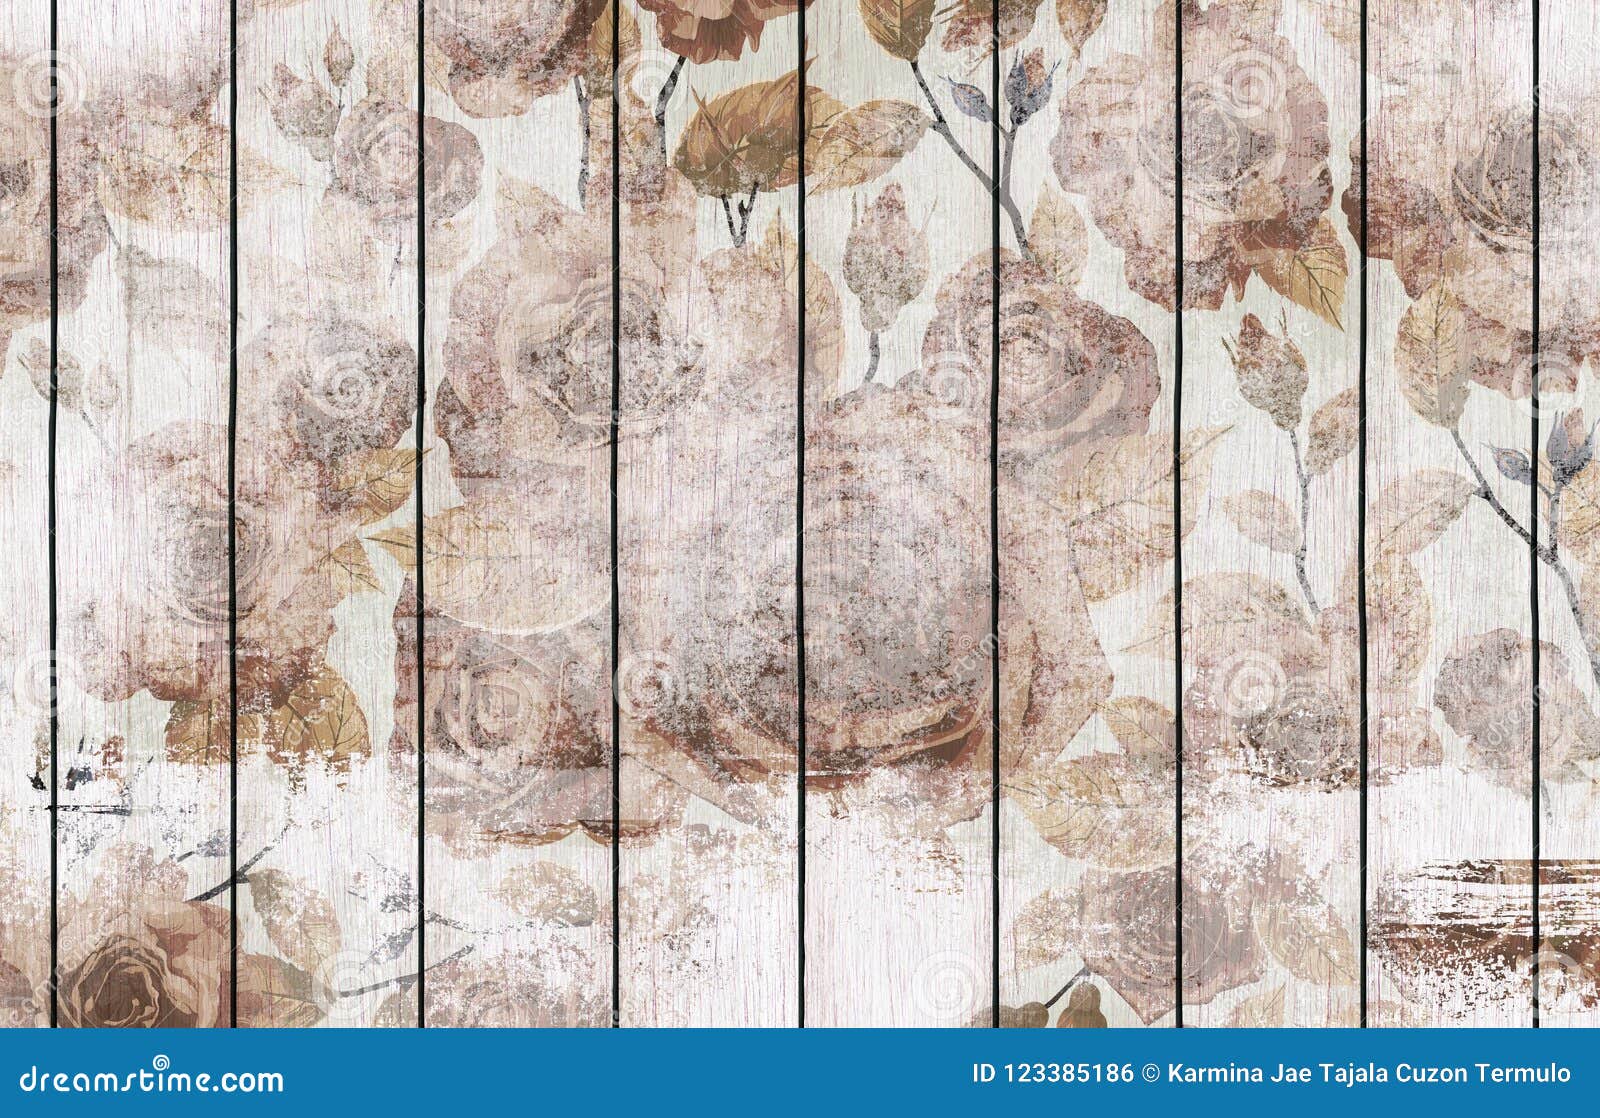 Painted Wood Background Wallpaper with Floral Design Stock Illustration ...